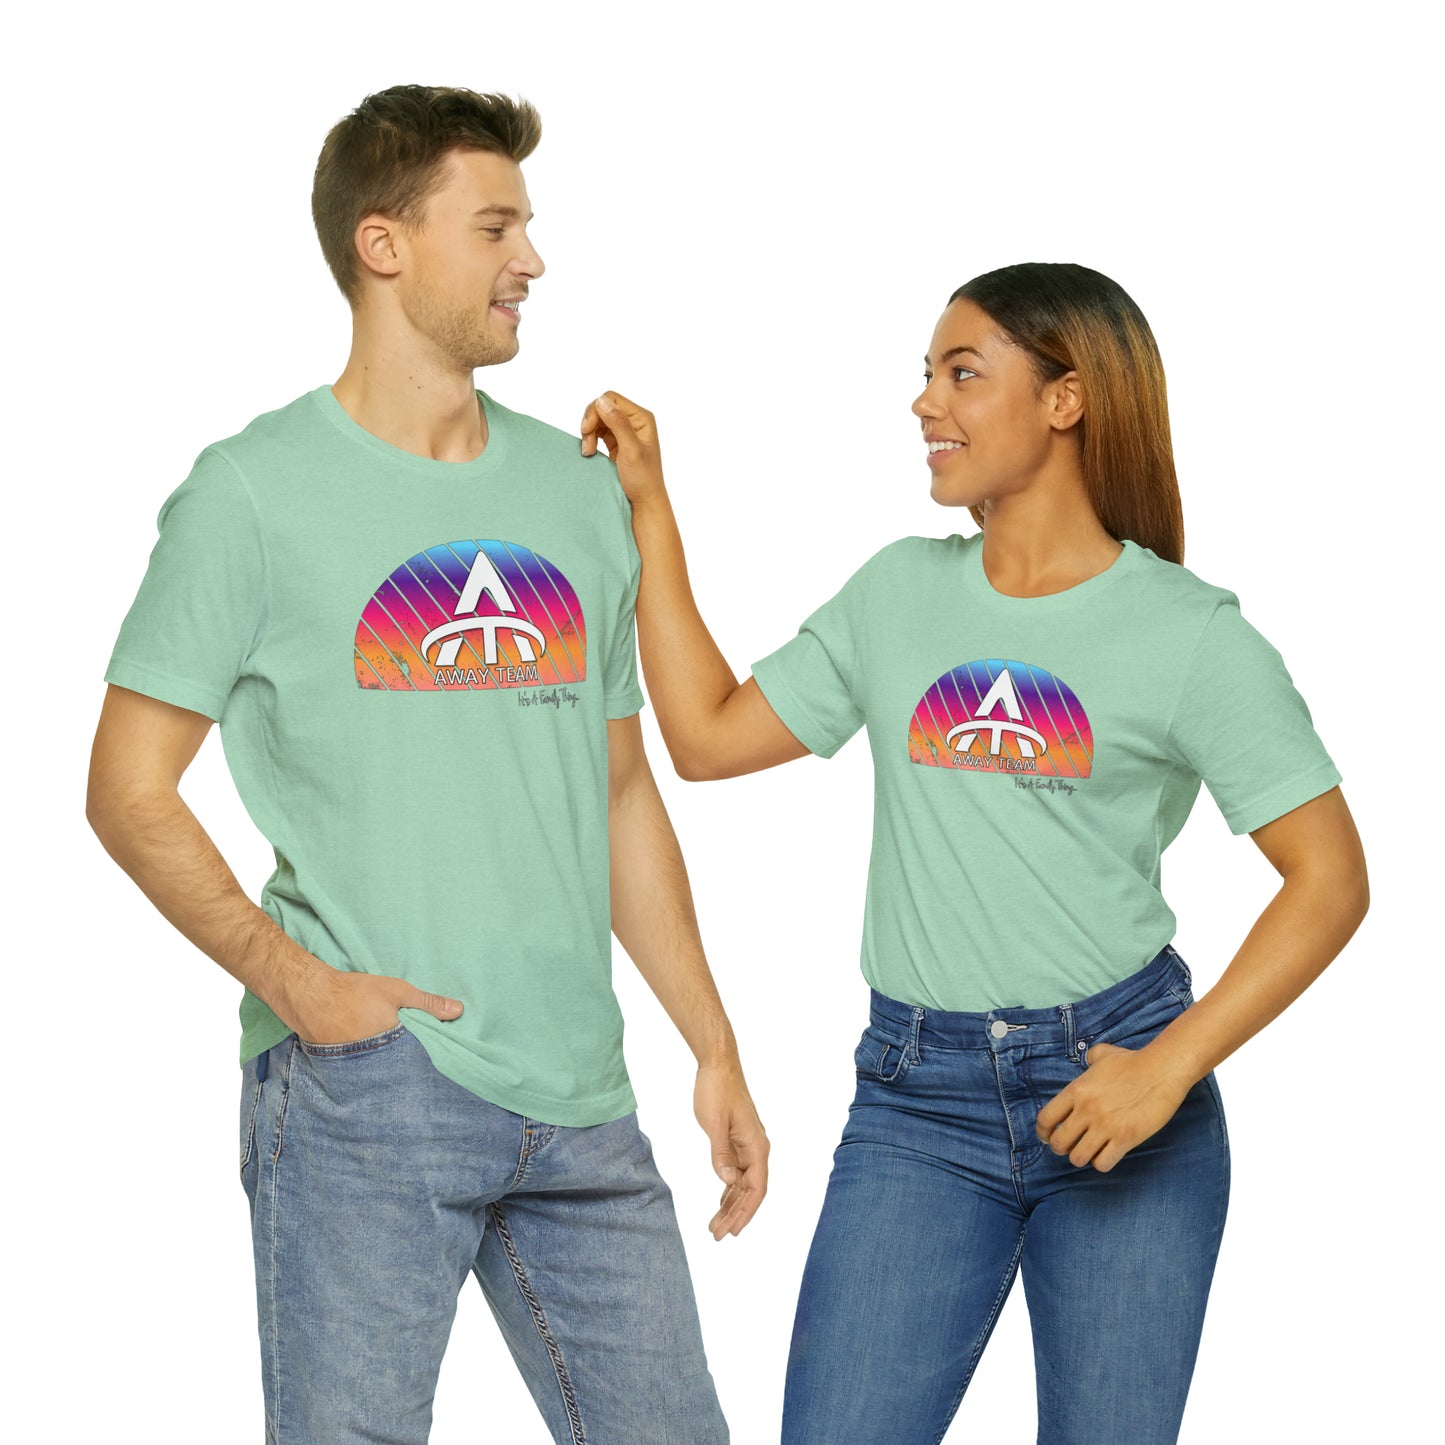 Away Team - It's a Family Thing - Unisex Jersey Short Sleeve Tee